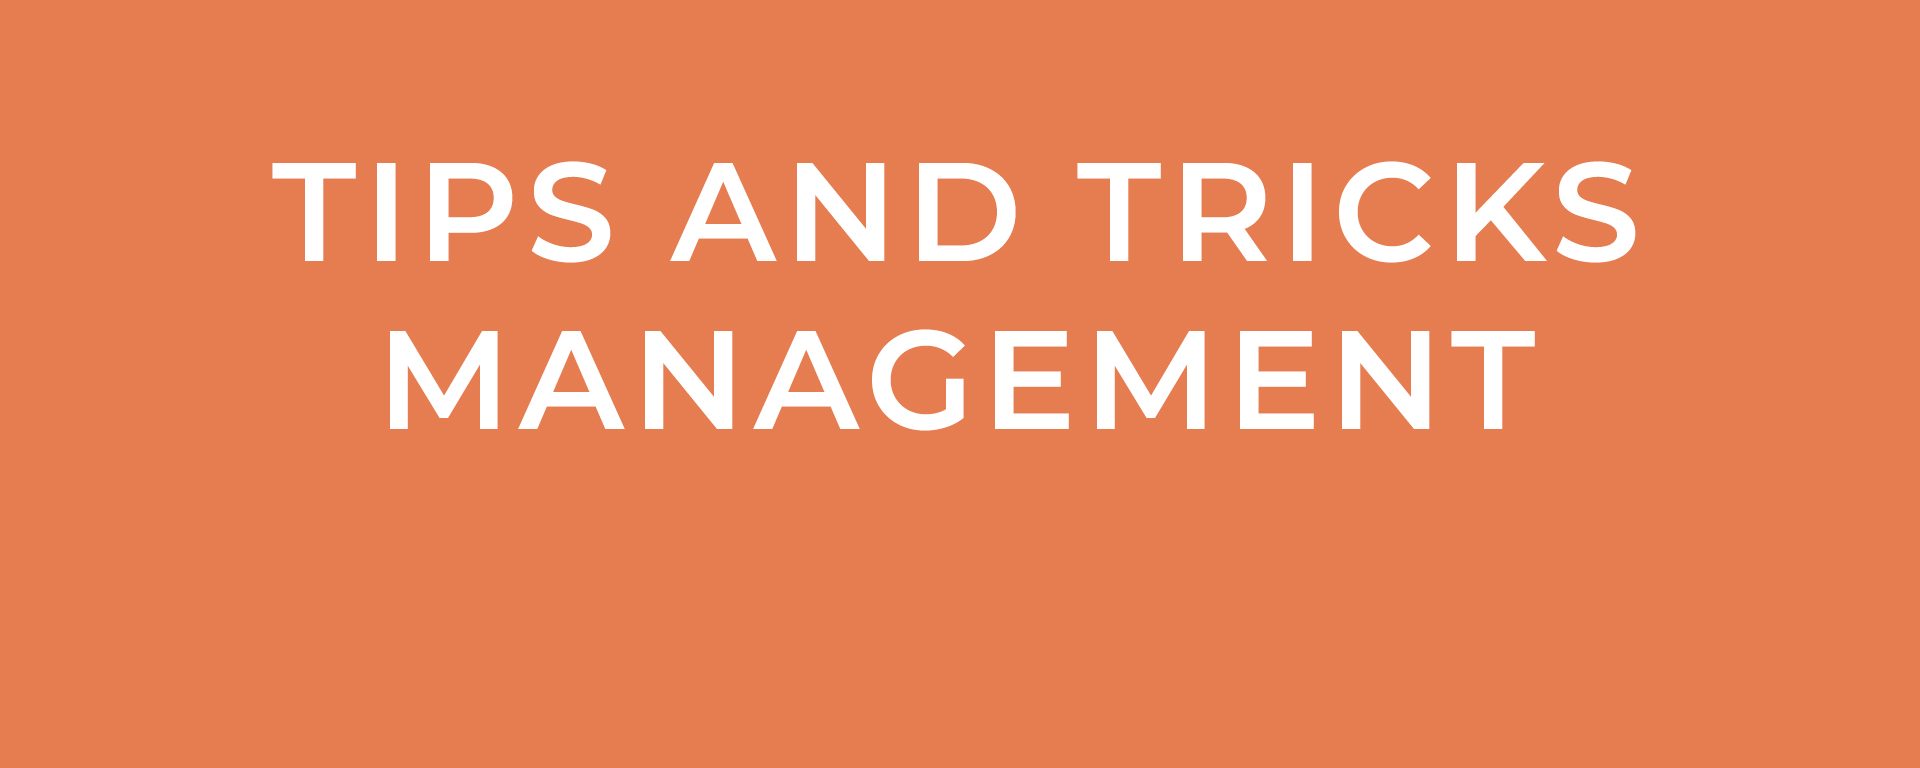 Tips and Tricks-Management